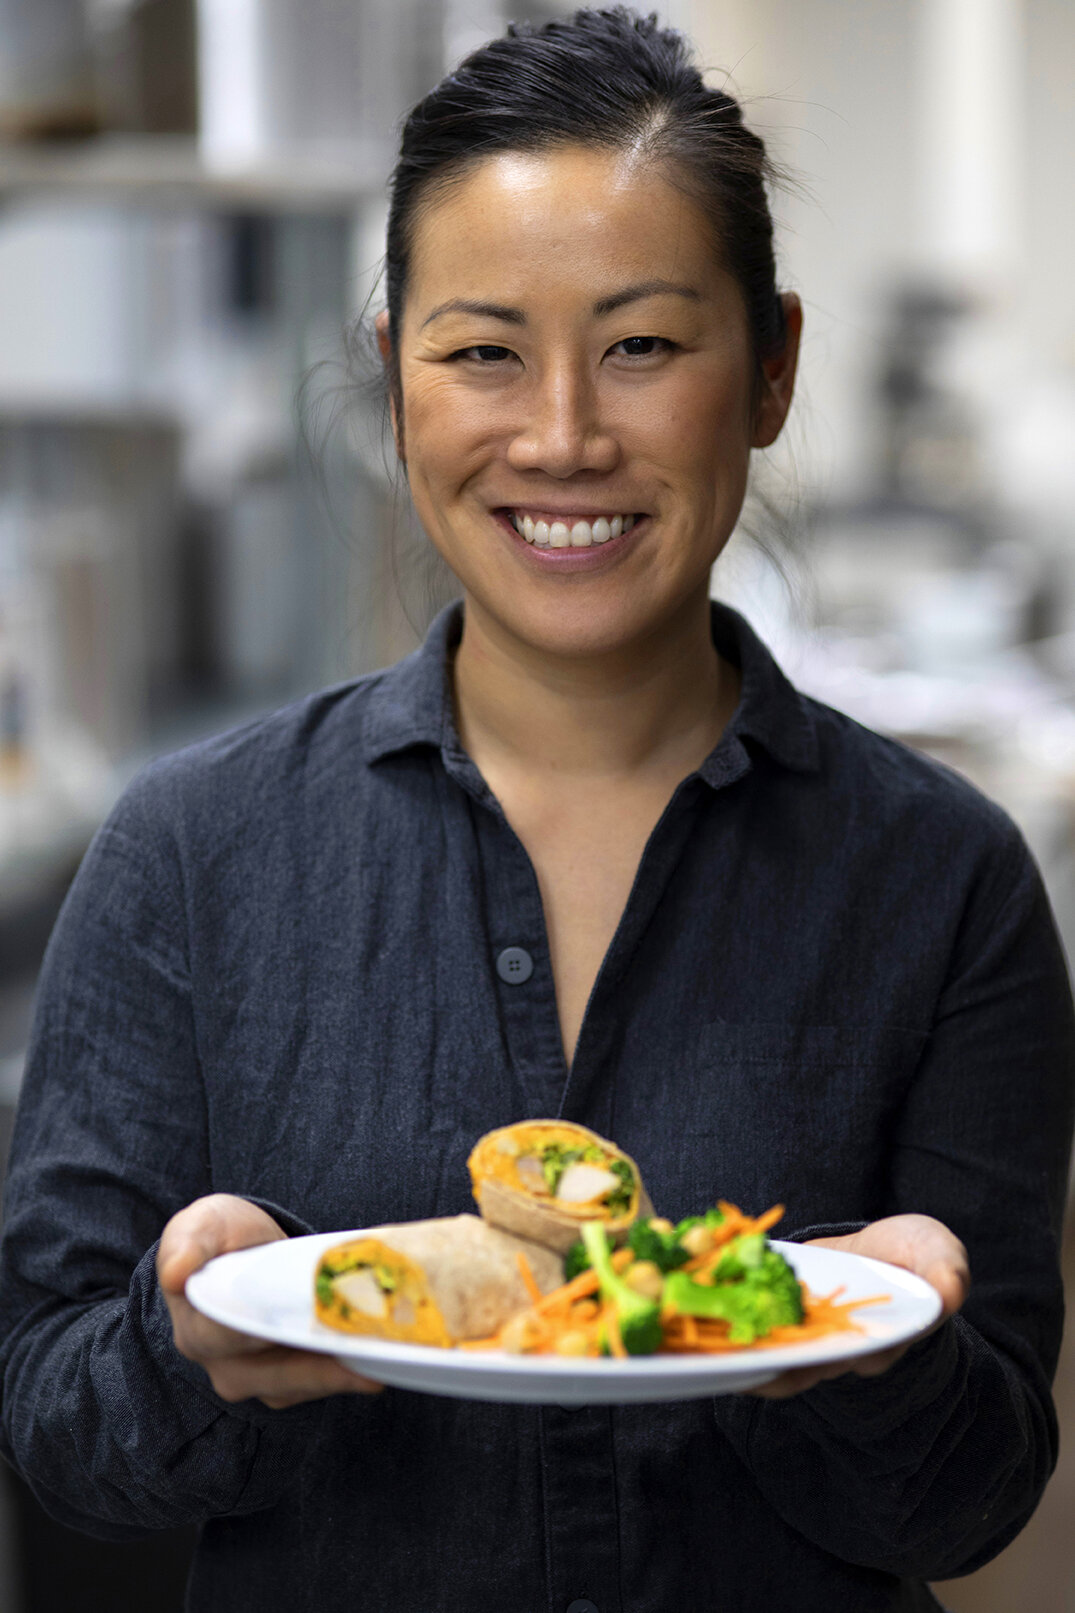 Woman smiling holding plate of food